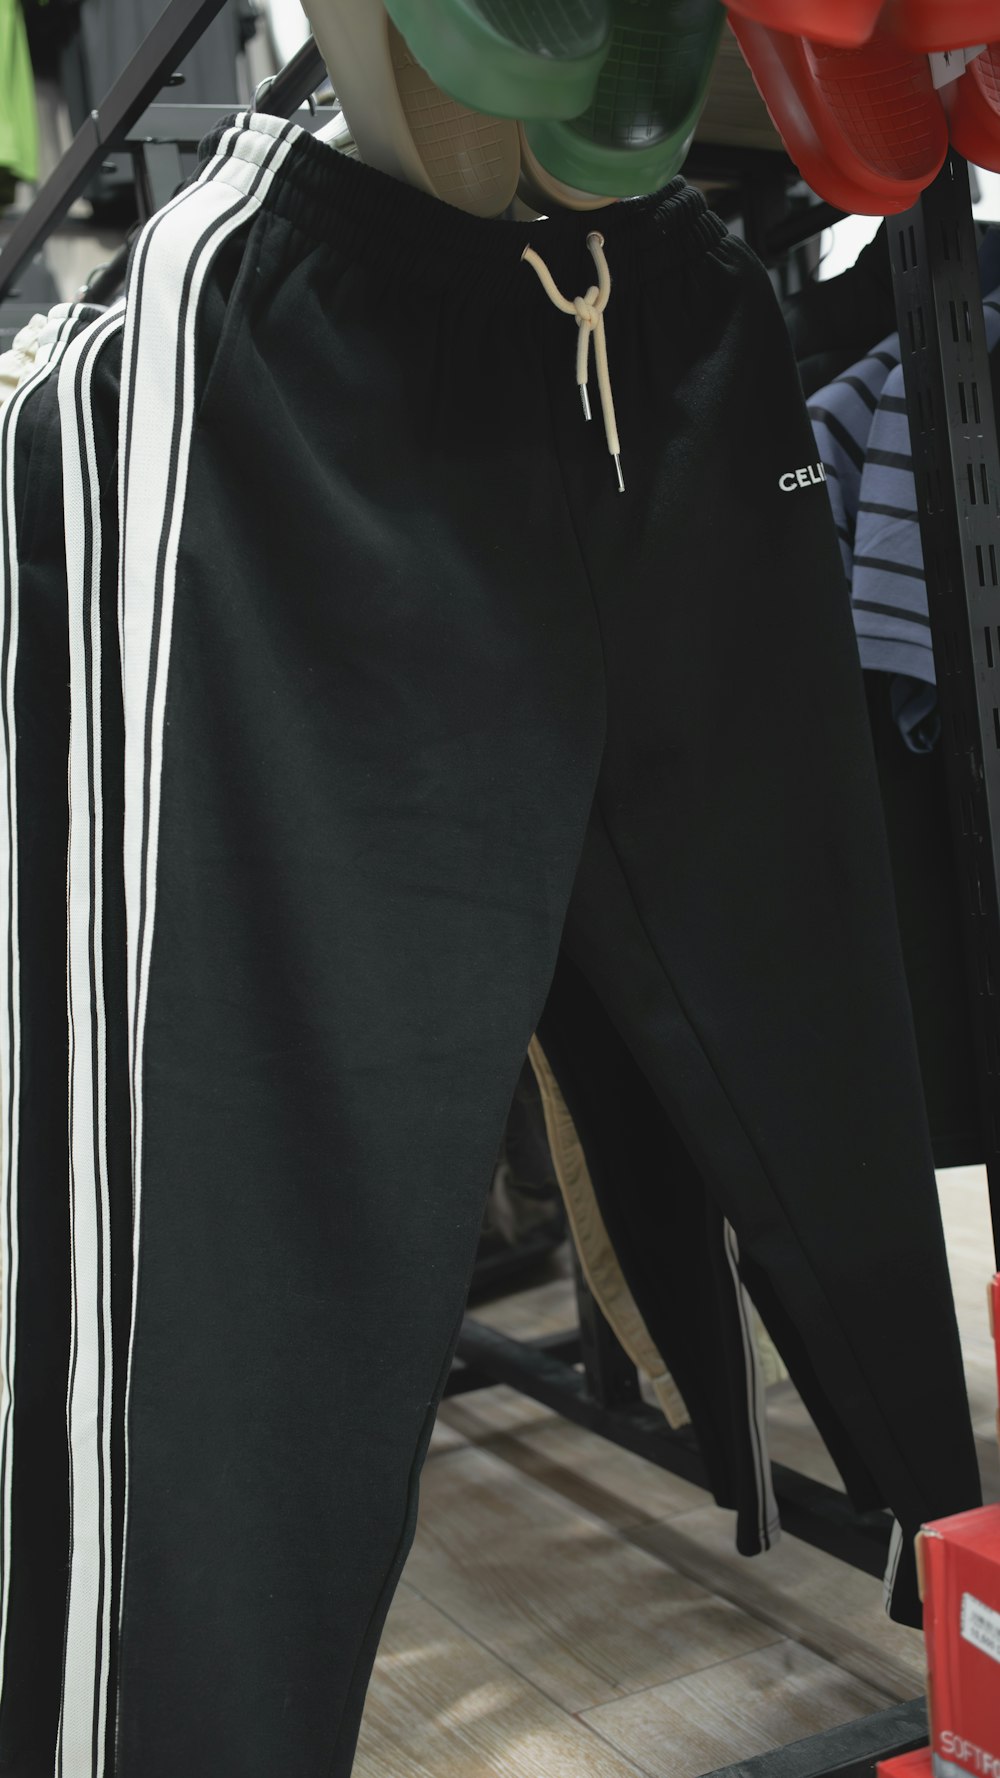 a pair of black and white pants hanging from a rack